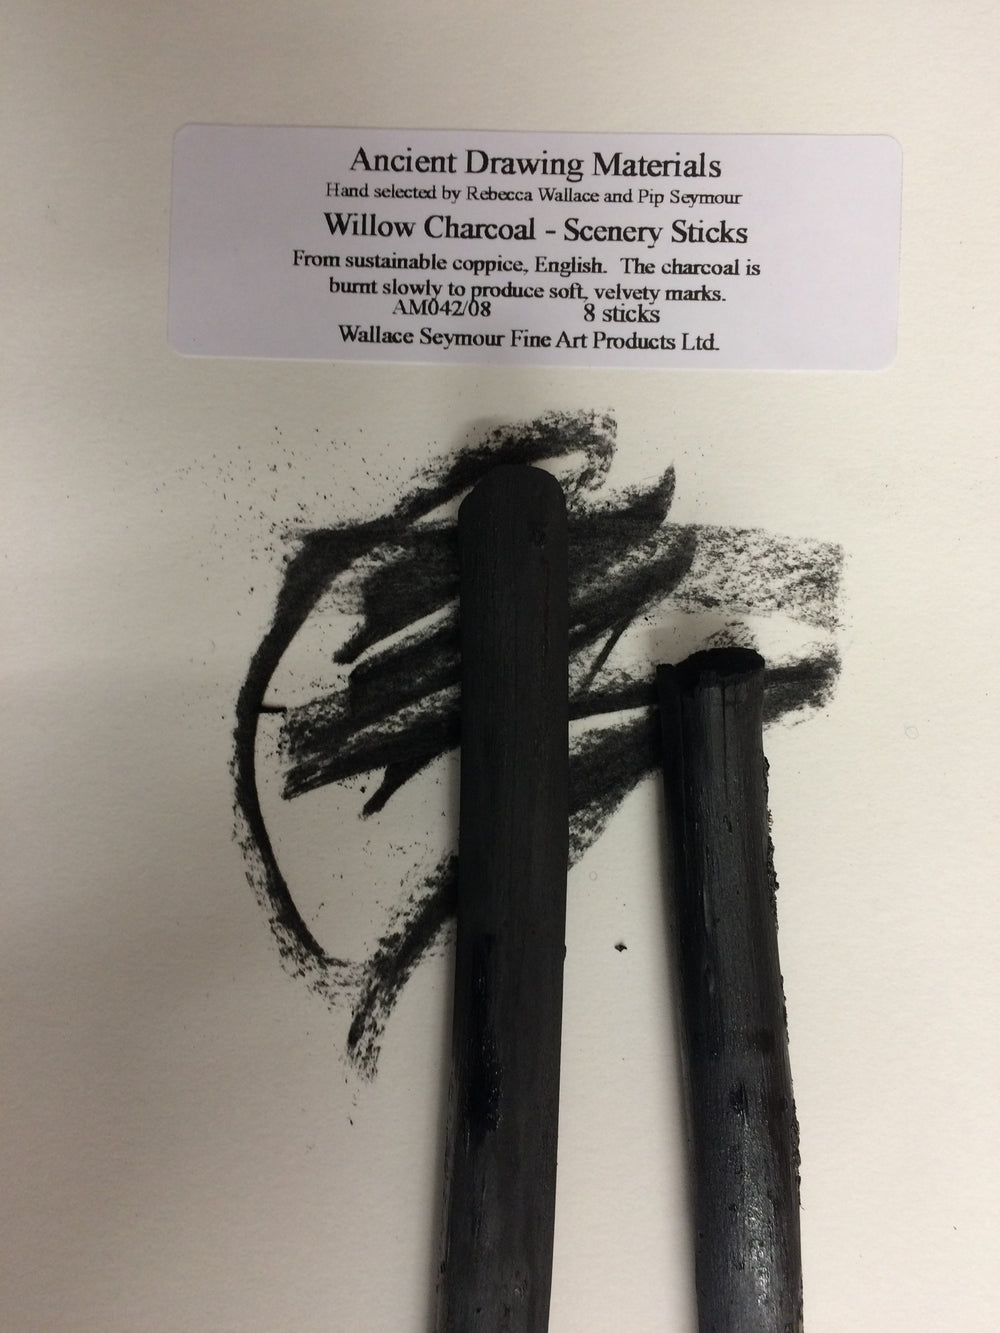 Willow Charcoal - Scenery Sticks